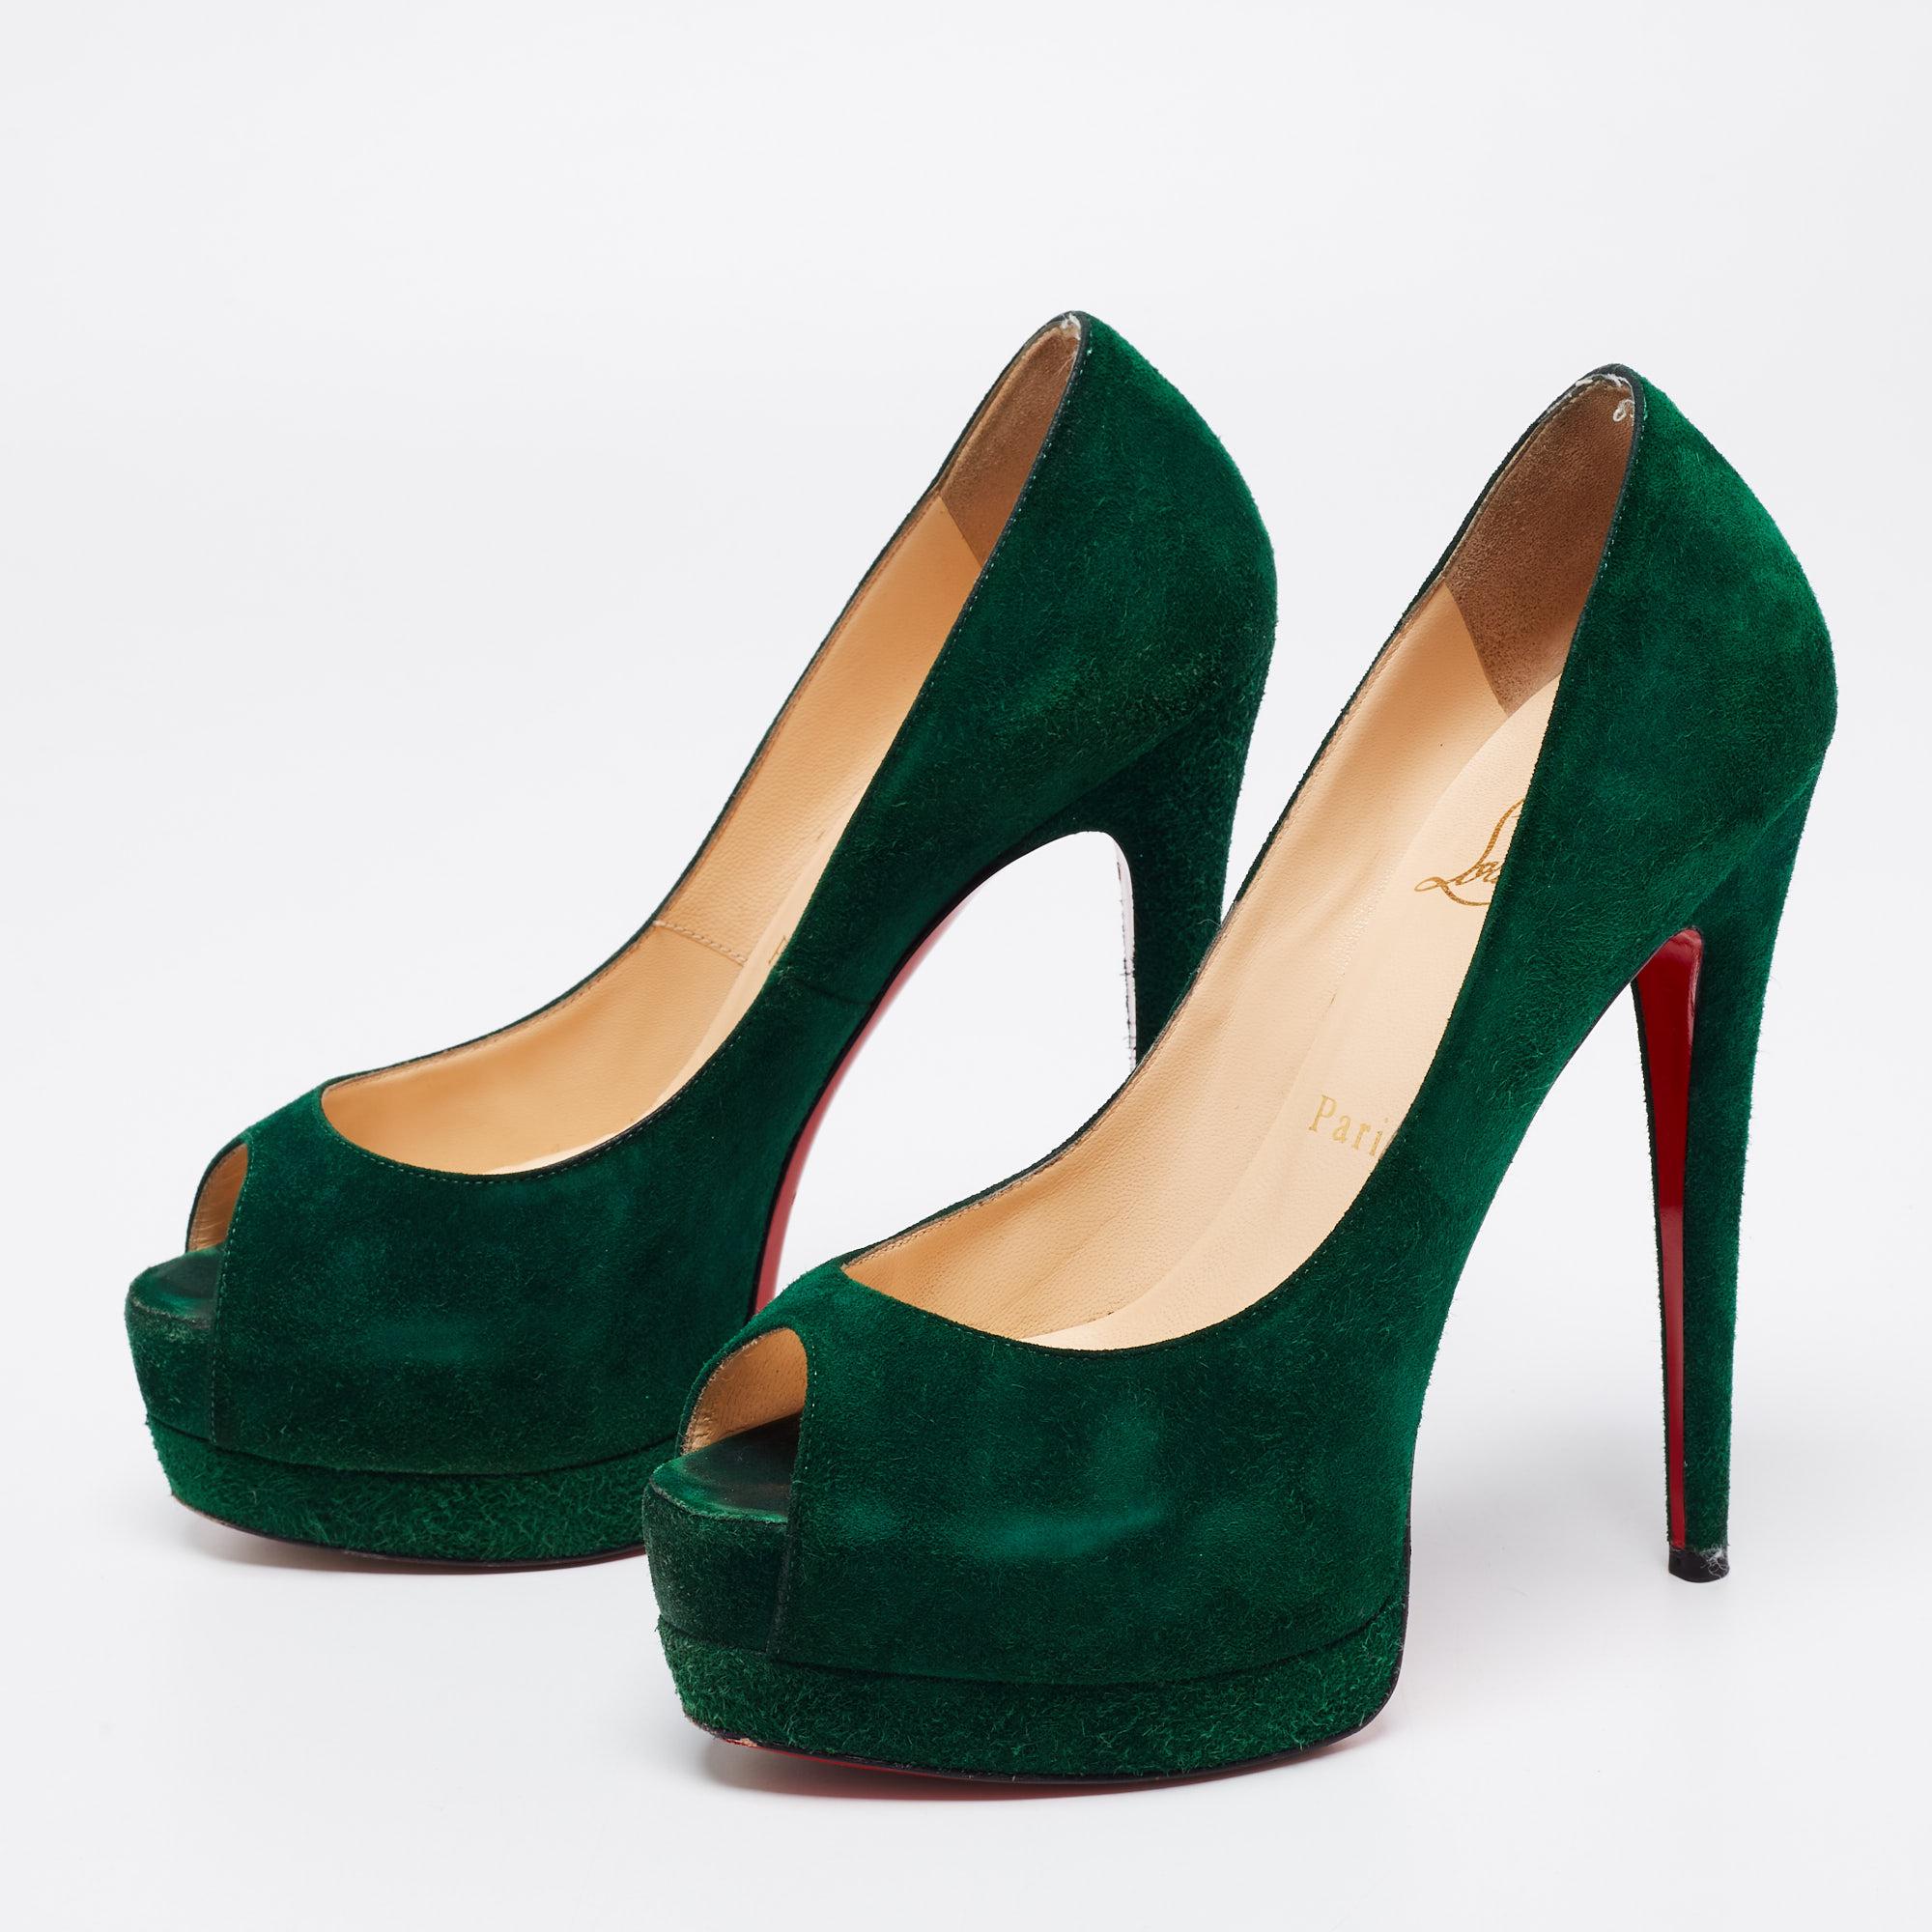 This pair of Christian Louboutin pumps is utterly glamorous and regal. The gorgeous green suede pumps are sure to make you feel like a diva every time you wear them. They are finished with peep-toes, platforms, leather insoles, and towering 14 cm